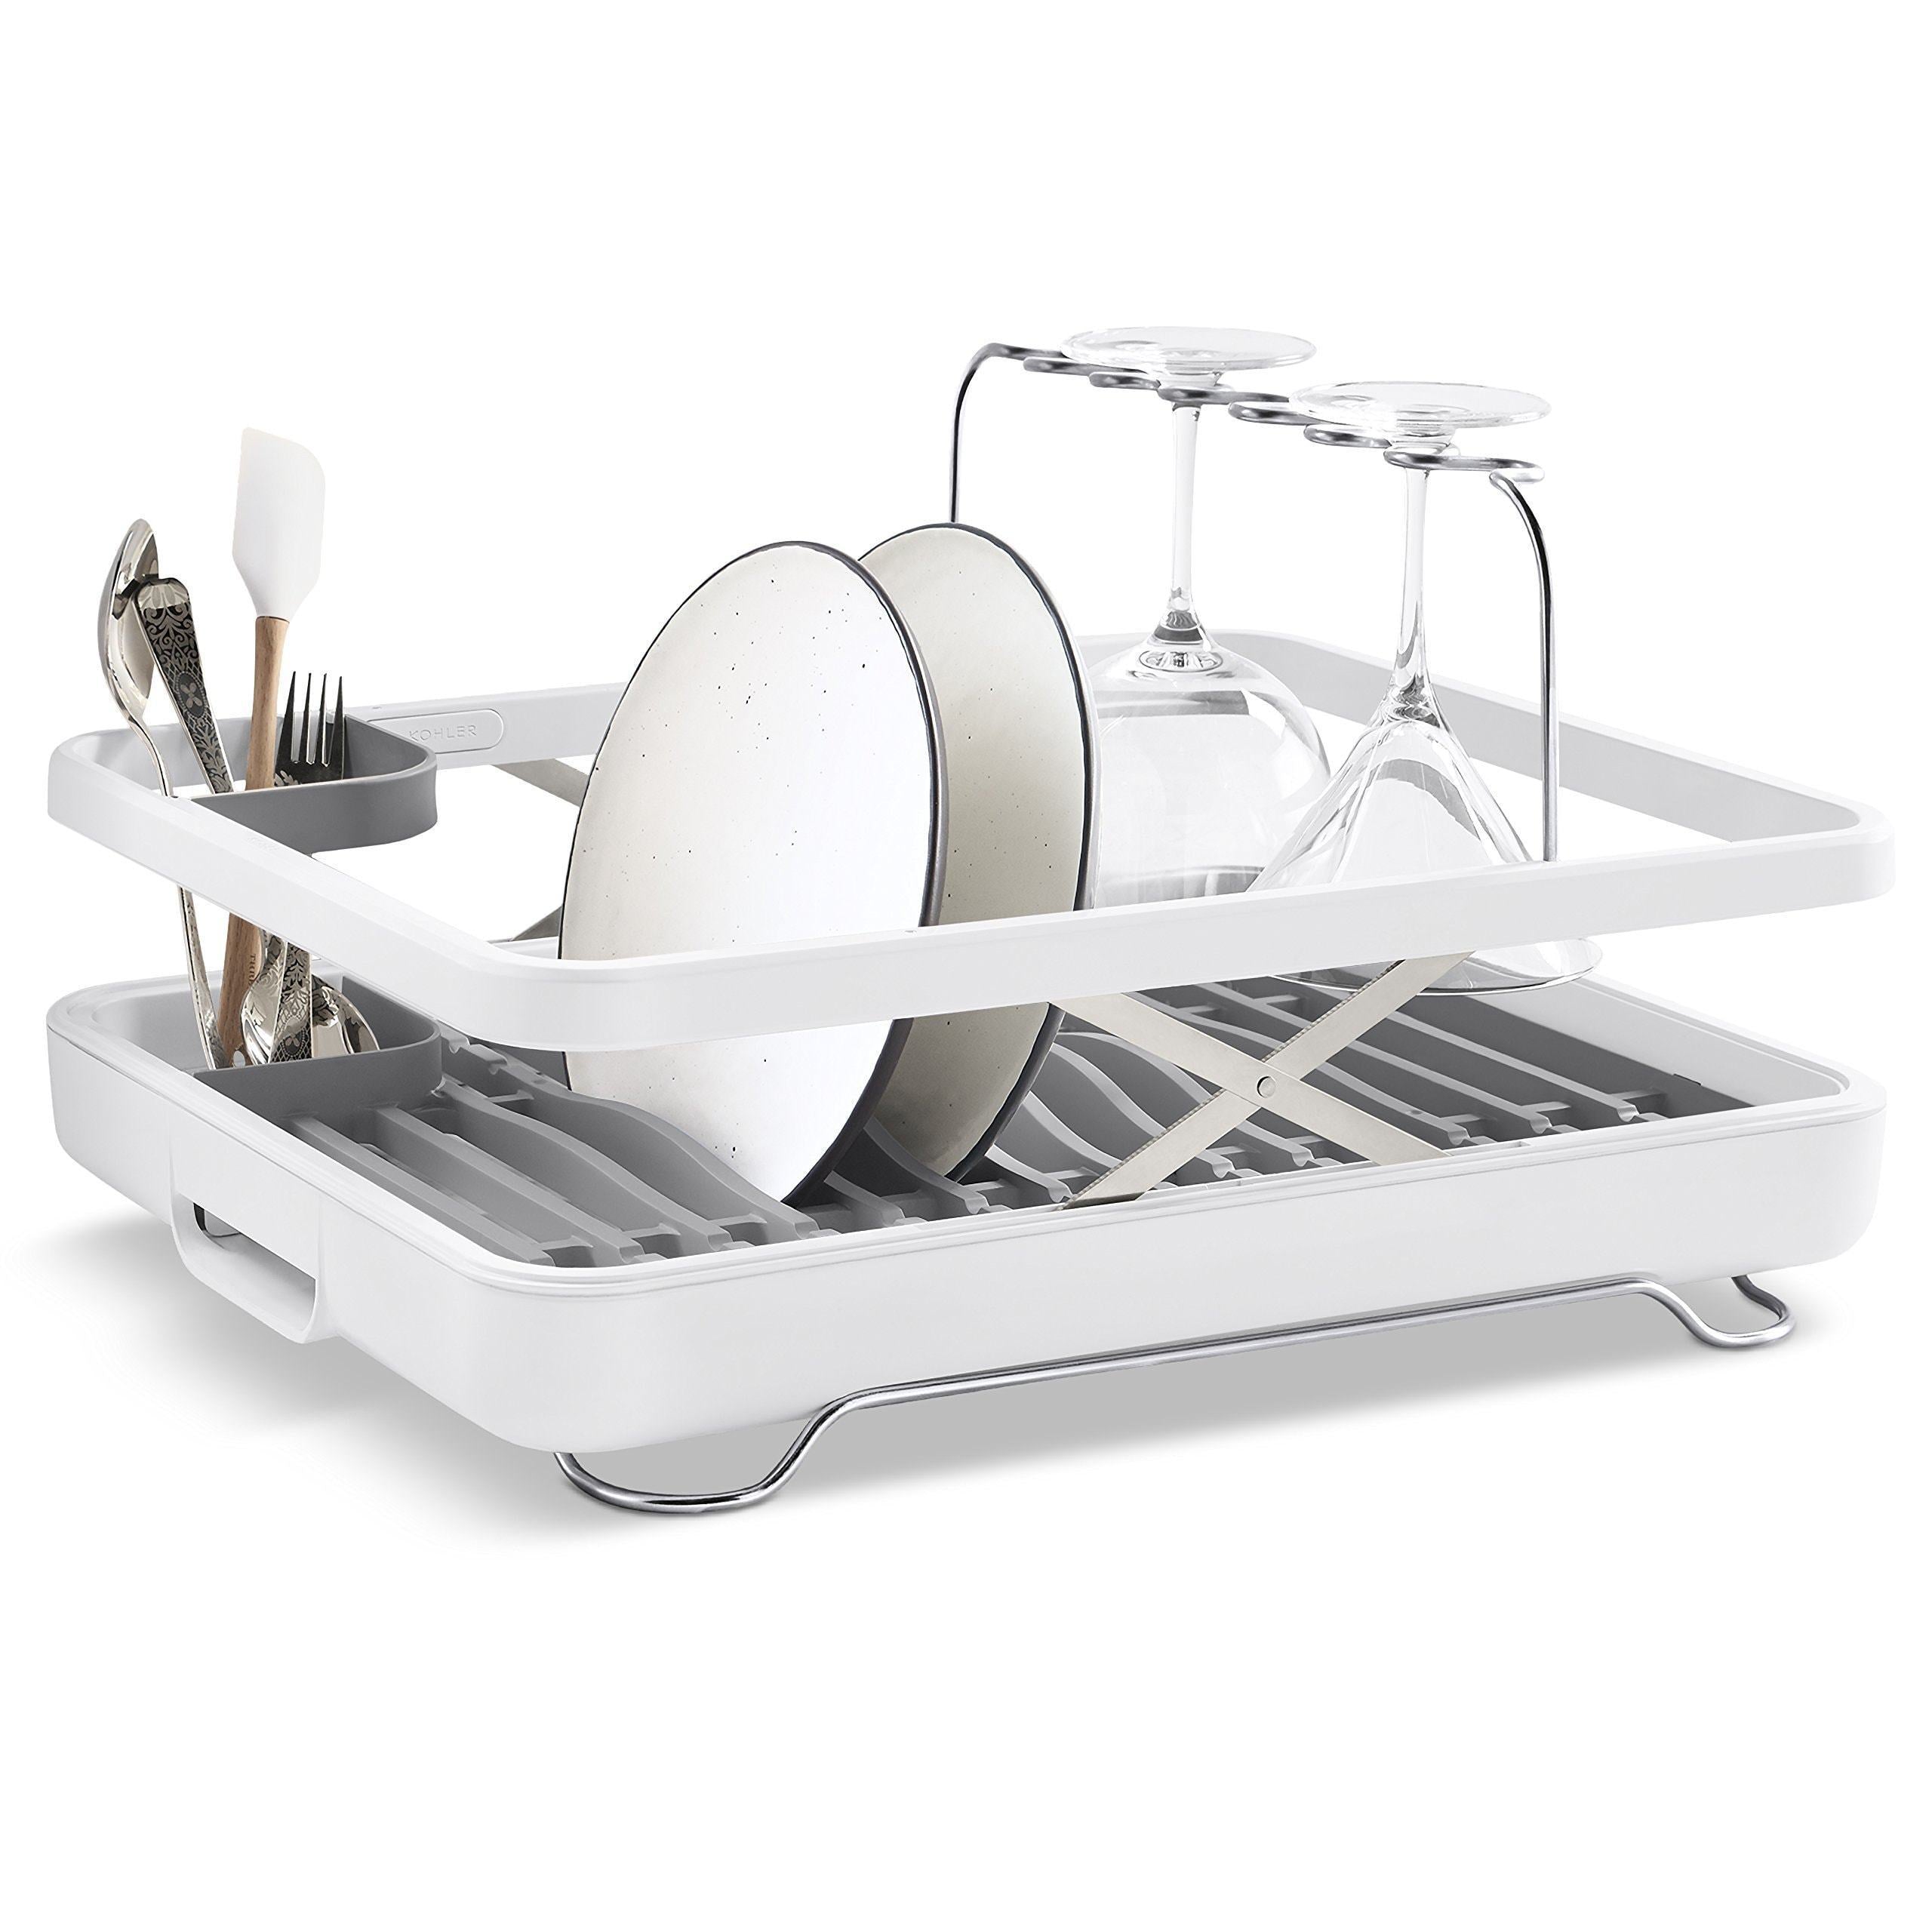 KOHLER (K-8631-0) Large Collapsible & Storable Dish Drying Rack with Wine Glass Holder and Collapsible Utensil Band. Even Made to Hold Pots and Pans, White